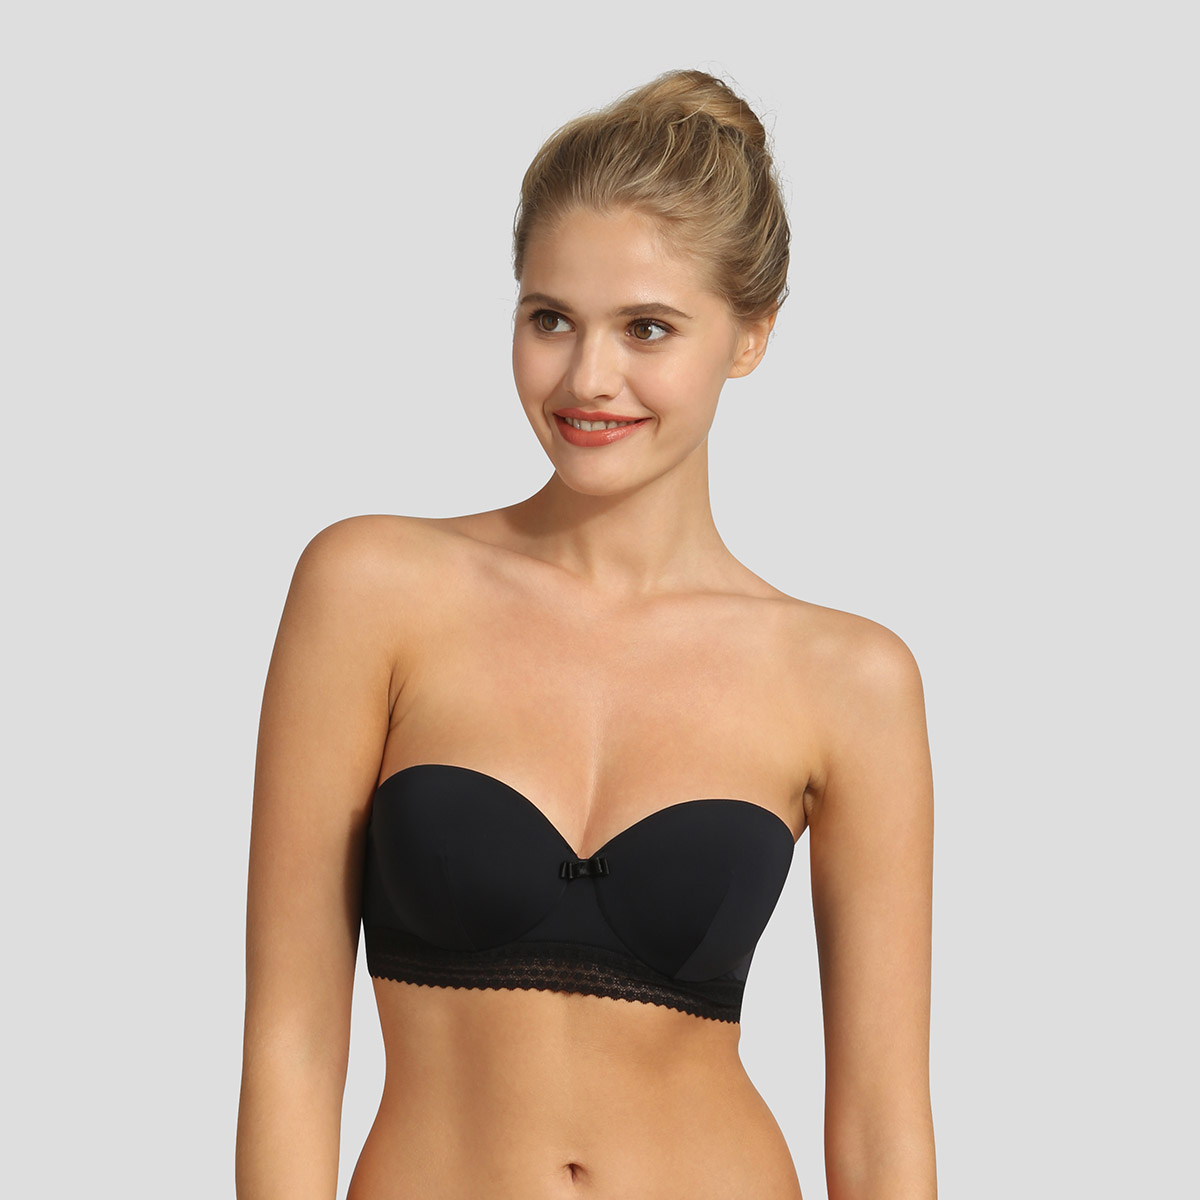 Deco Black Moulded Strapless Bra from Freya